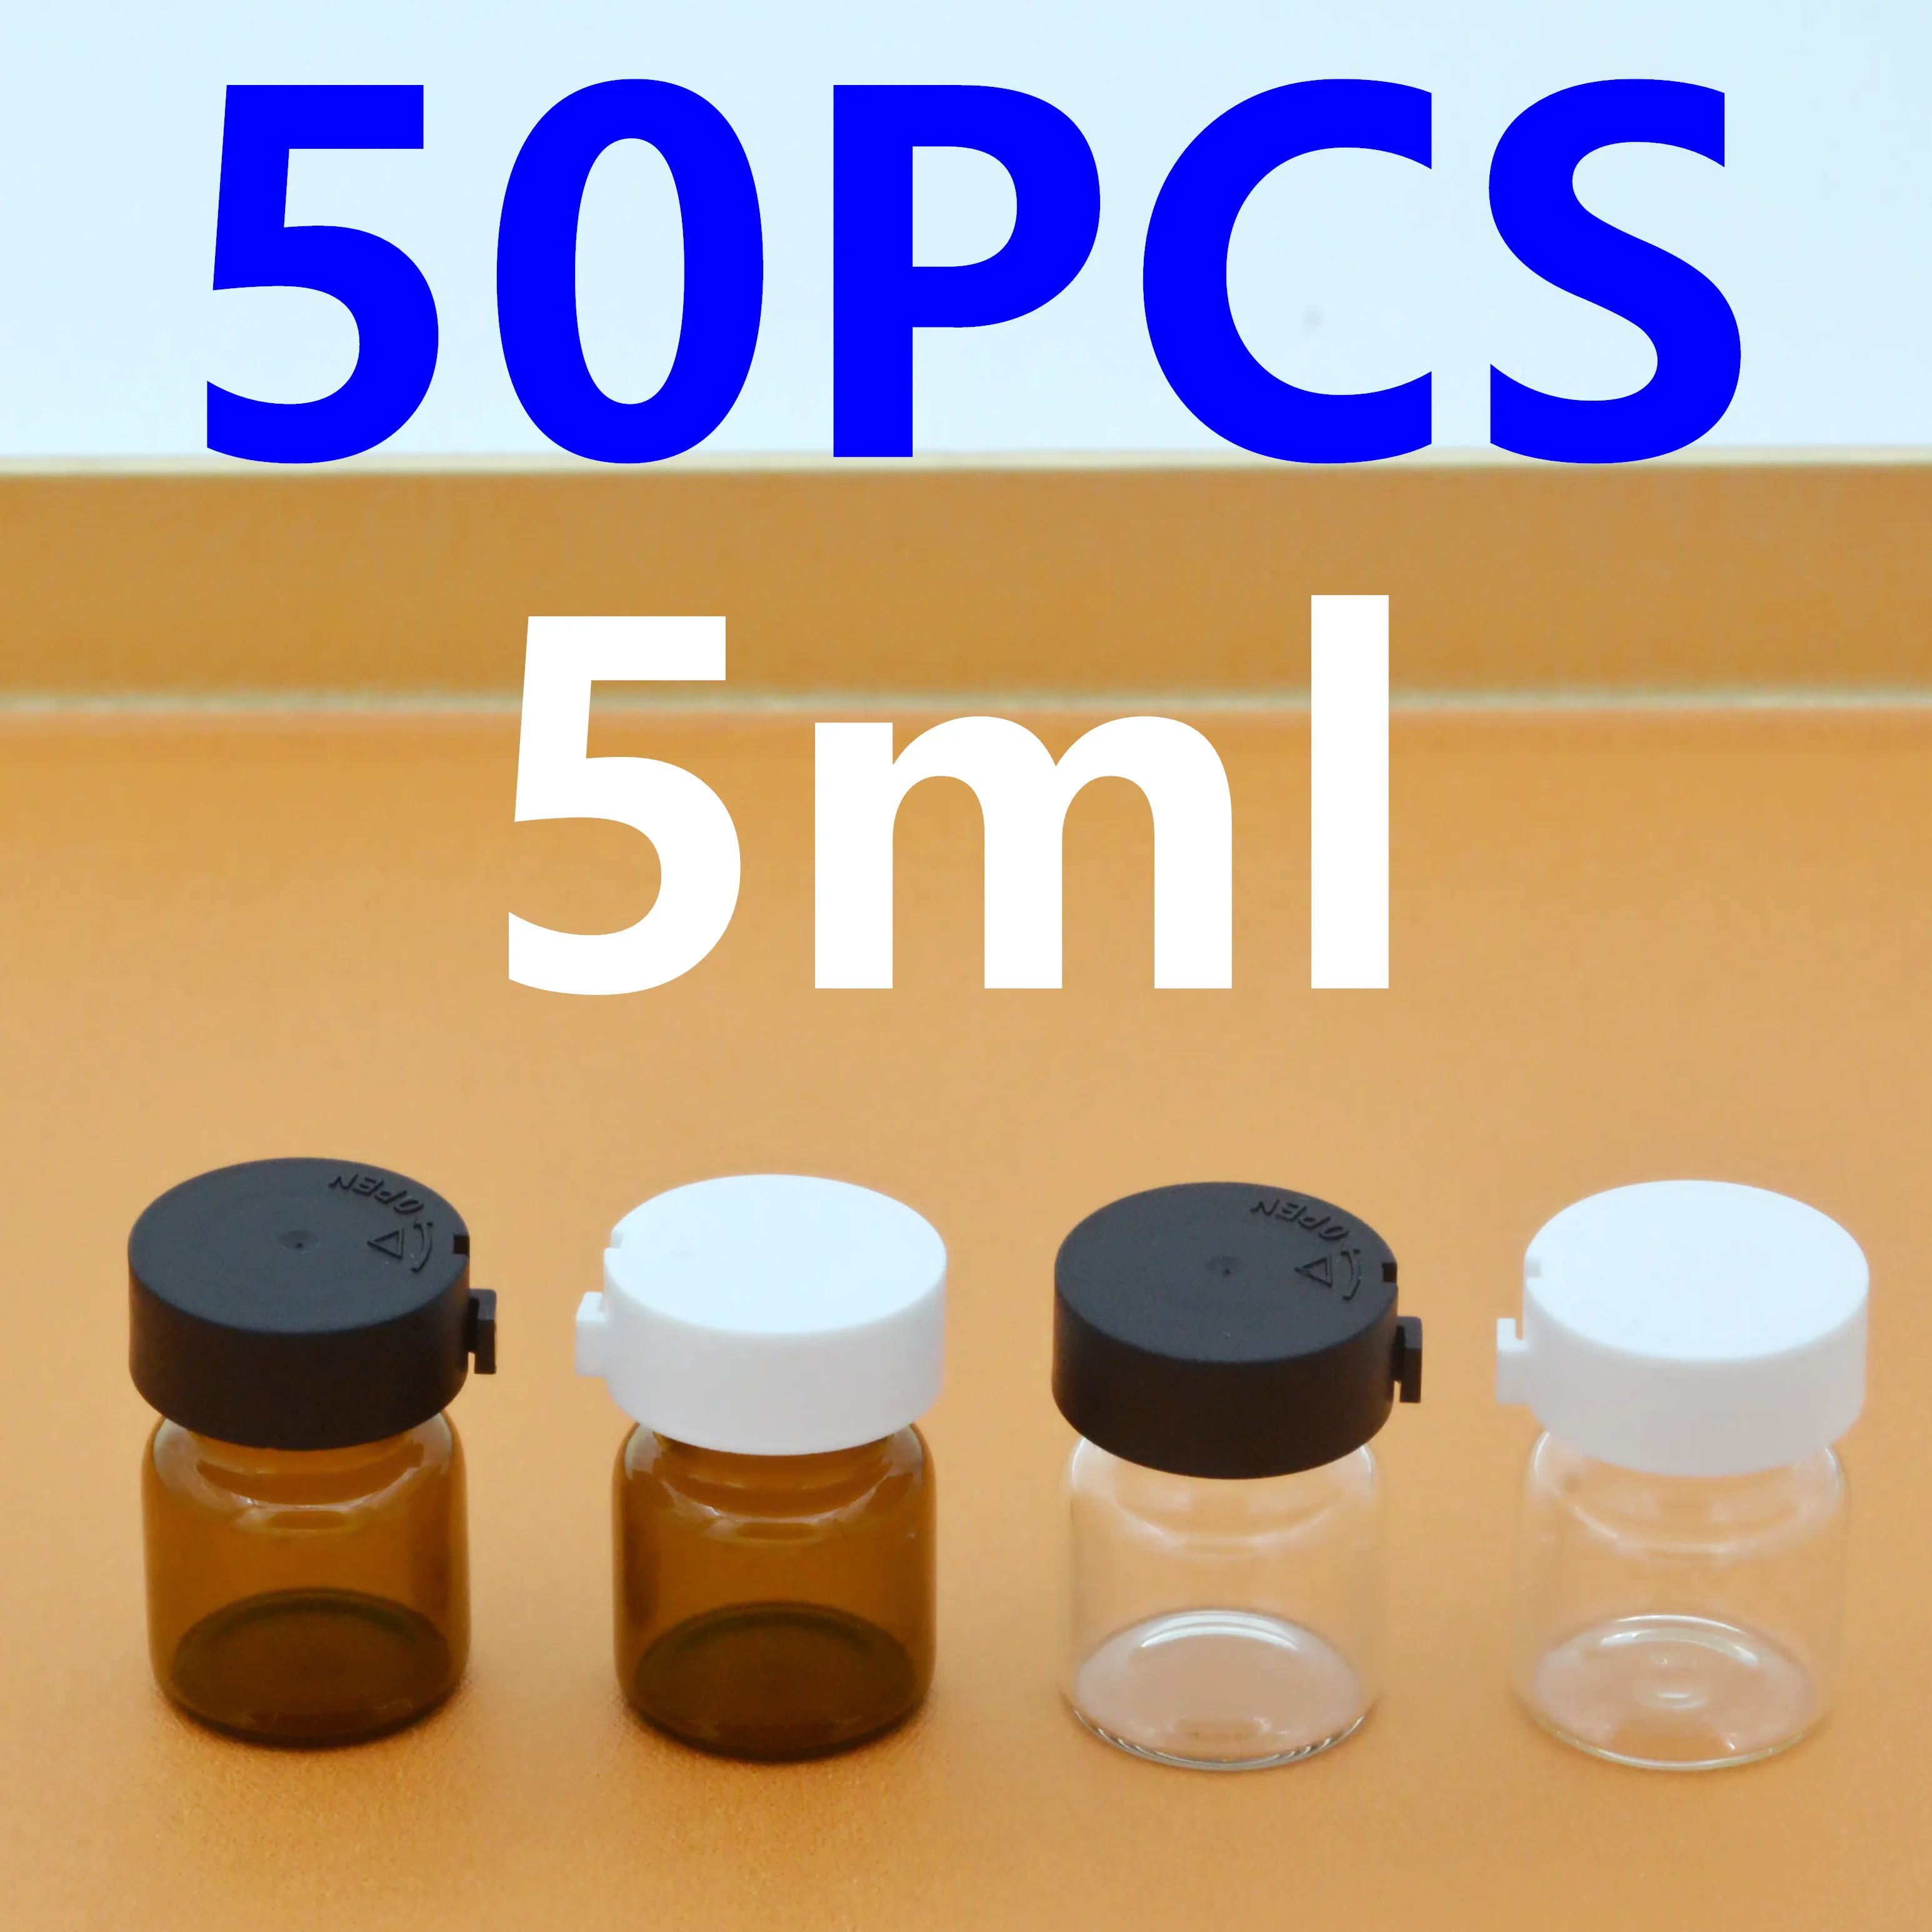 

50PCS 5ml Amber Bottles Freeze Dried Powder Bottle Bayonet Essential Oil Separate Vials Cosmetic Packing Container Travel